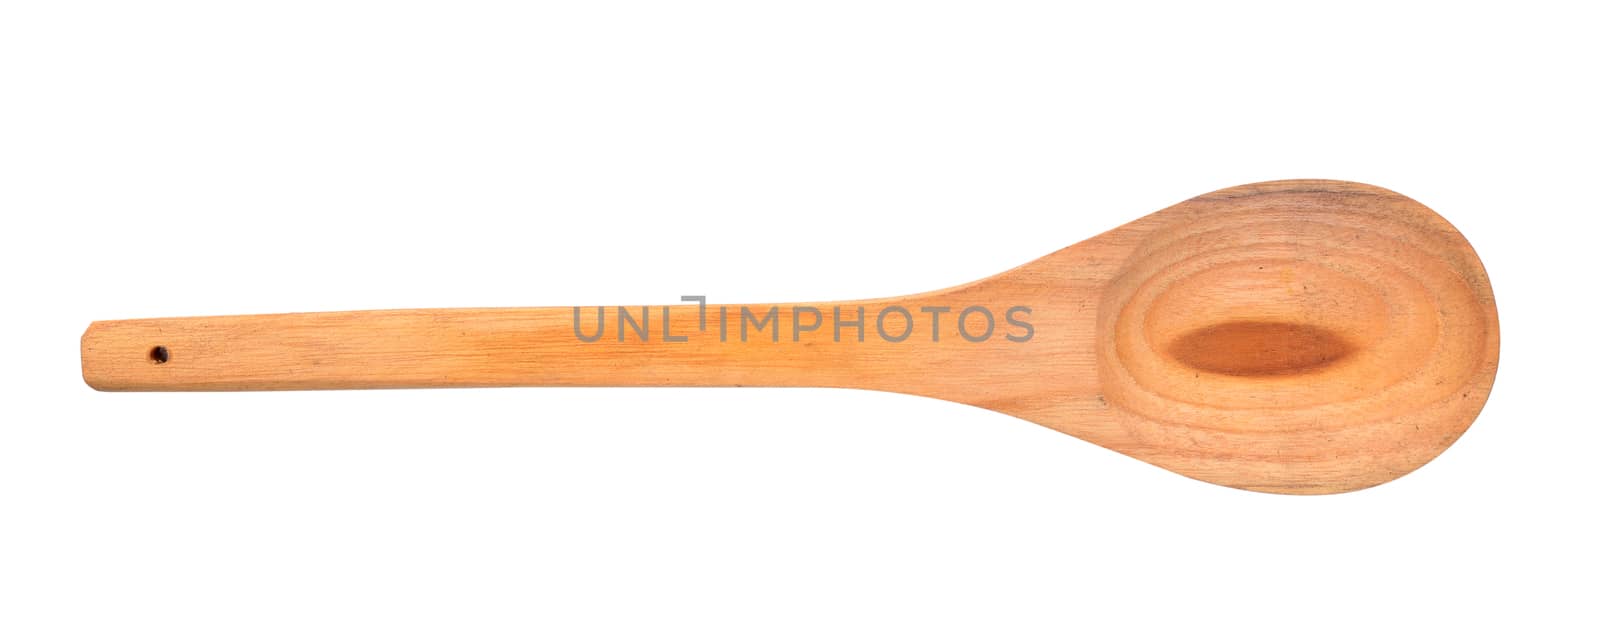  Wooden Spoon isolated on white background